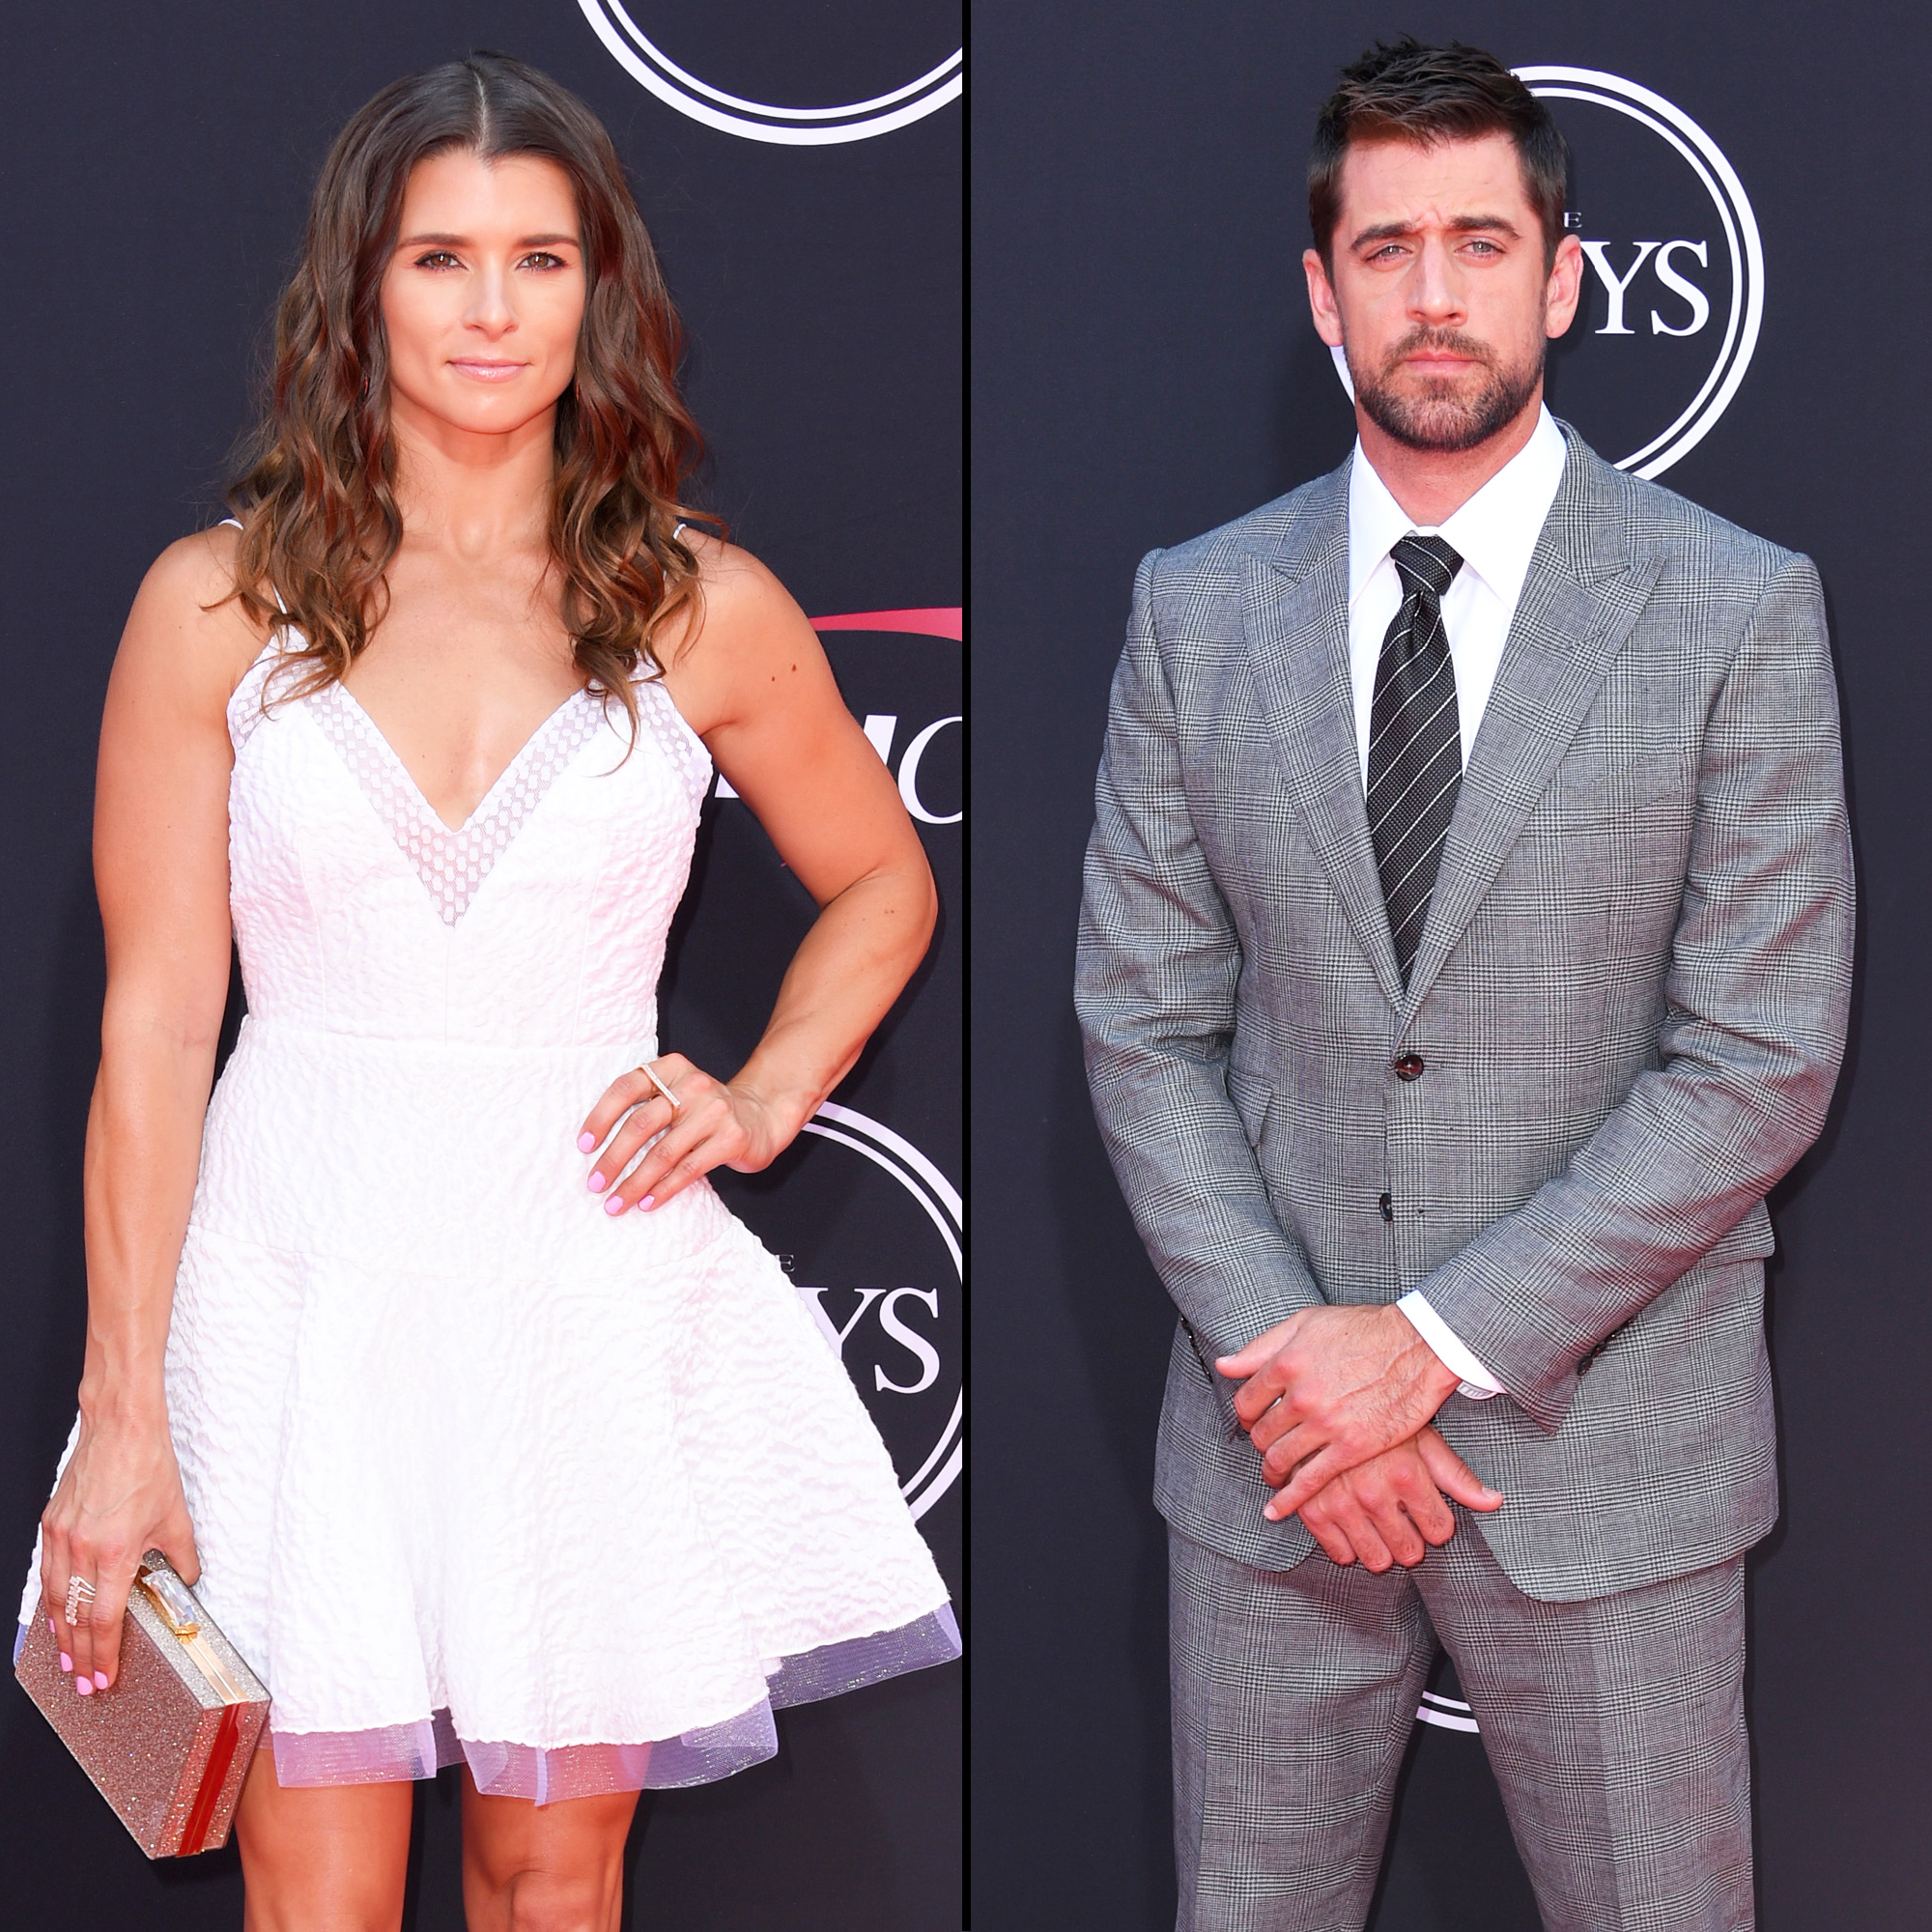 Danica Patrick Posts About Pain After Aaron Rodgers Split